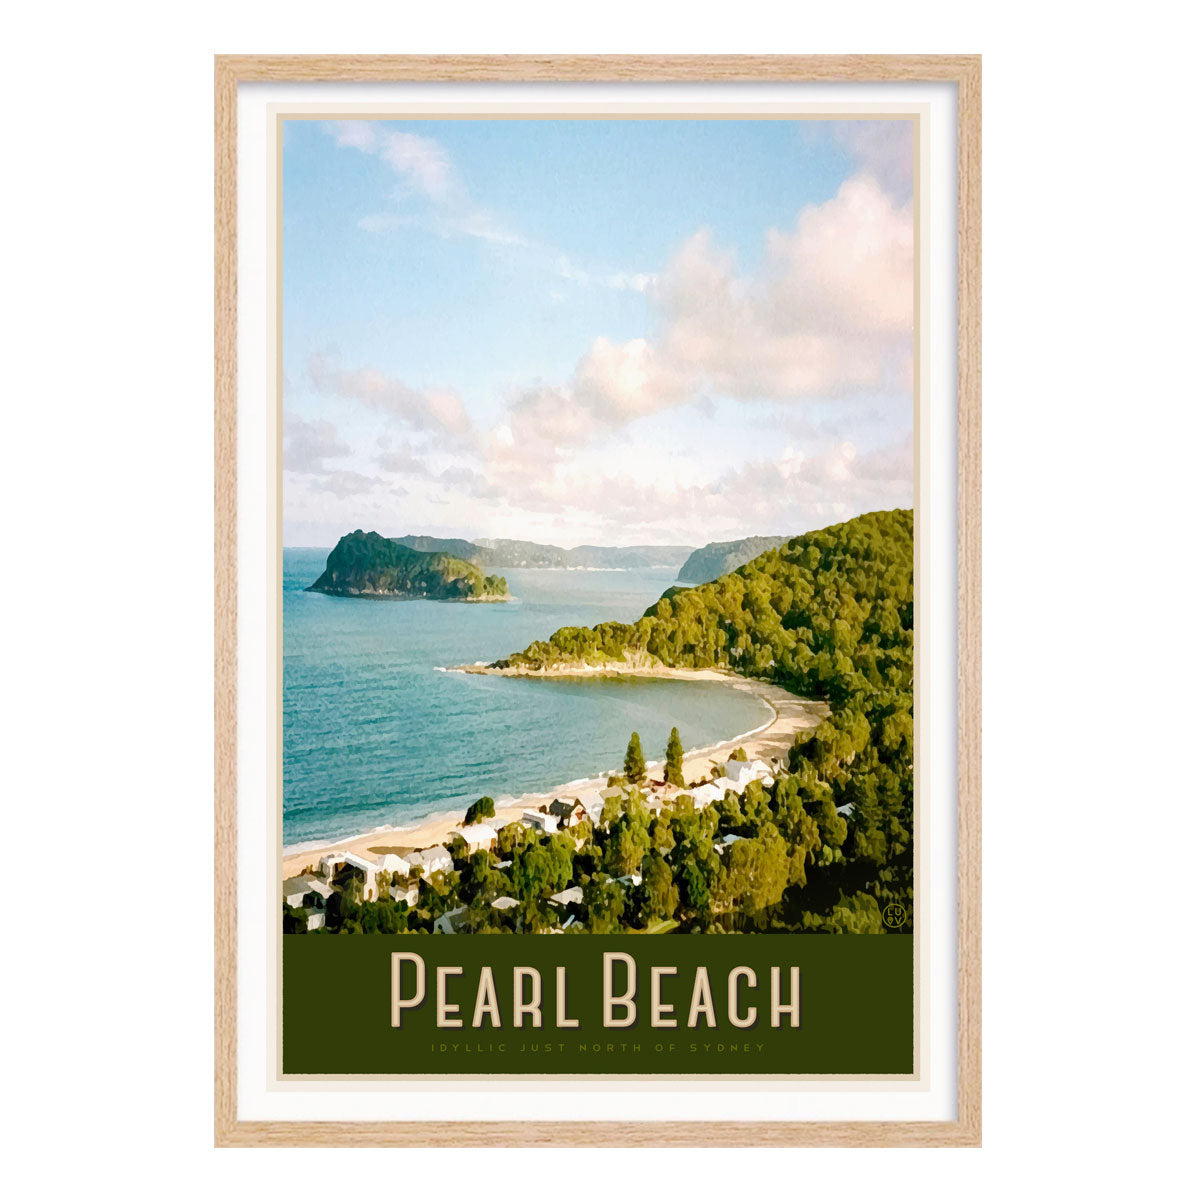 Pearl beach vintage travel poster in oak frame central coast by places we luv